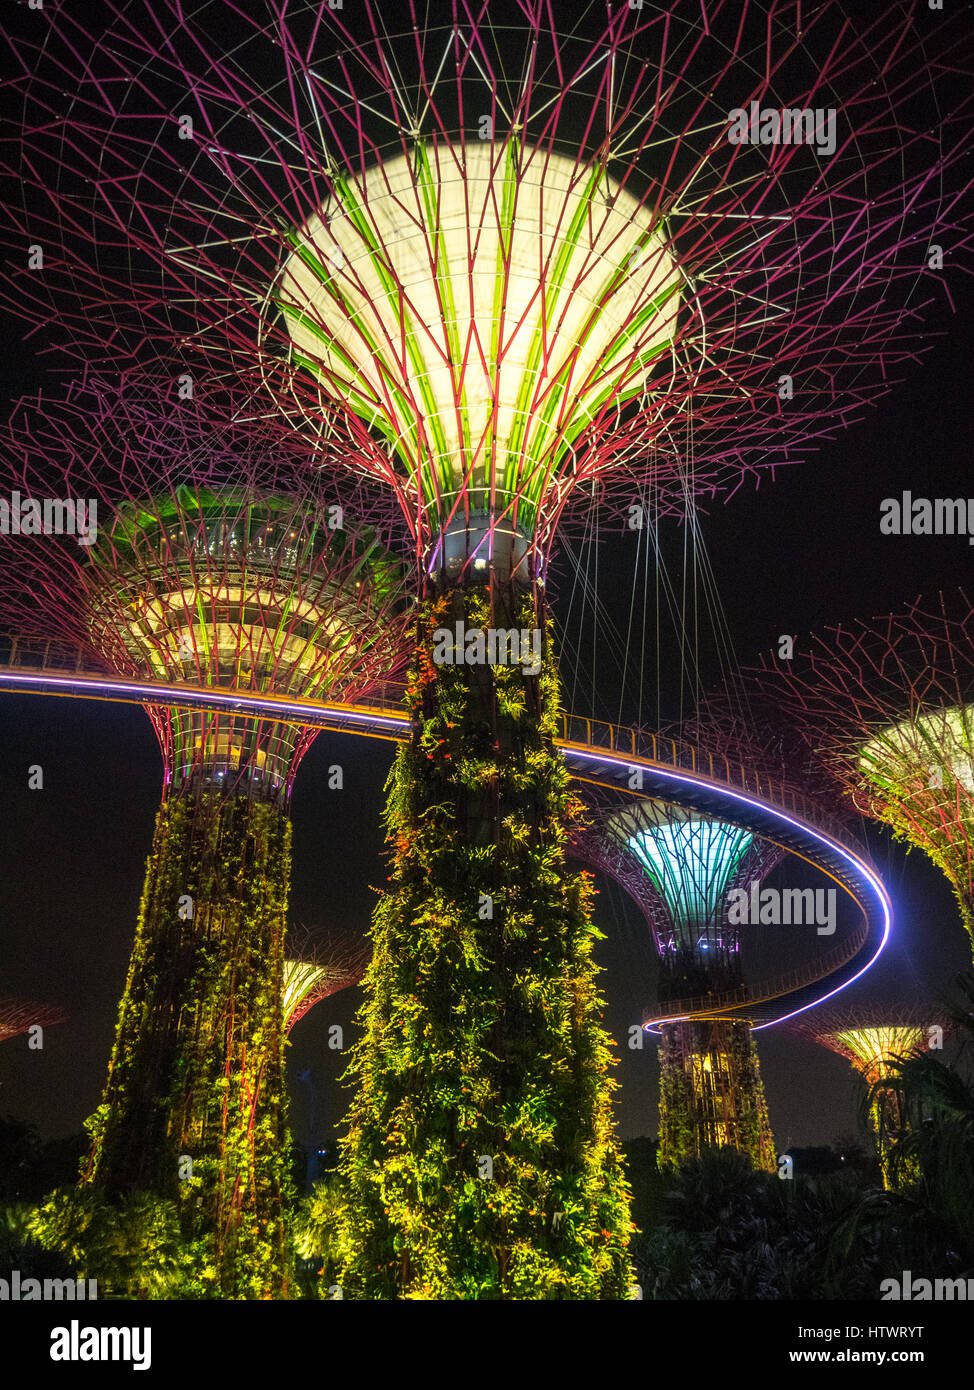 Tree-like structures called supertrees which are vertical gardens, lit at night, located in Gardens by the Bay, Marina Bay, Singapore. Stock Photo